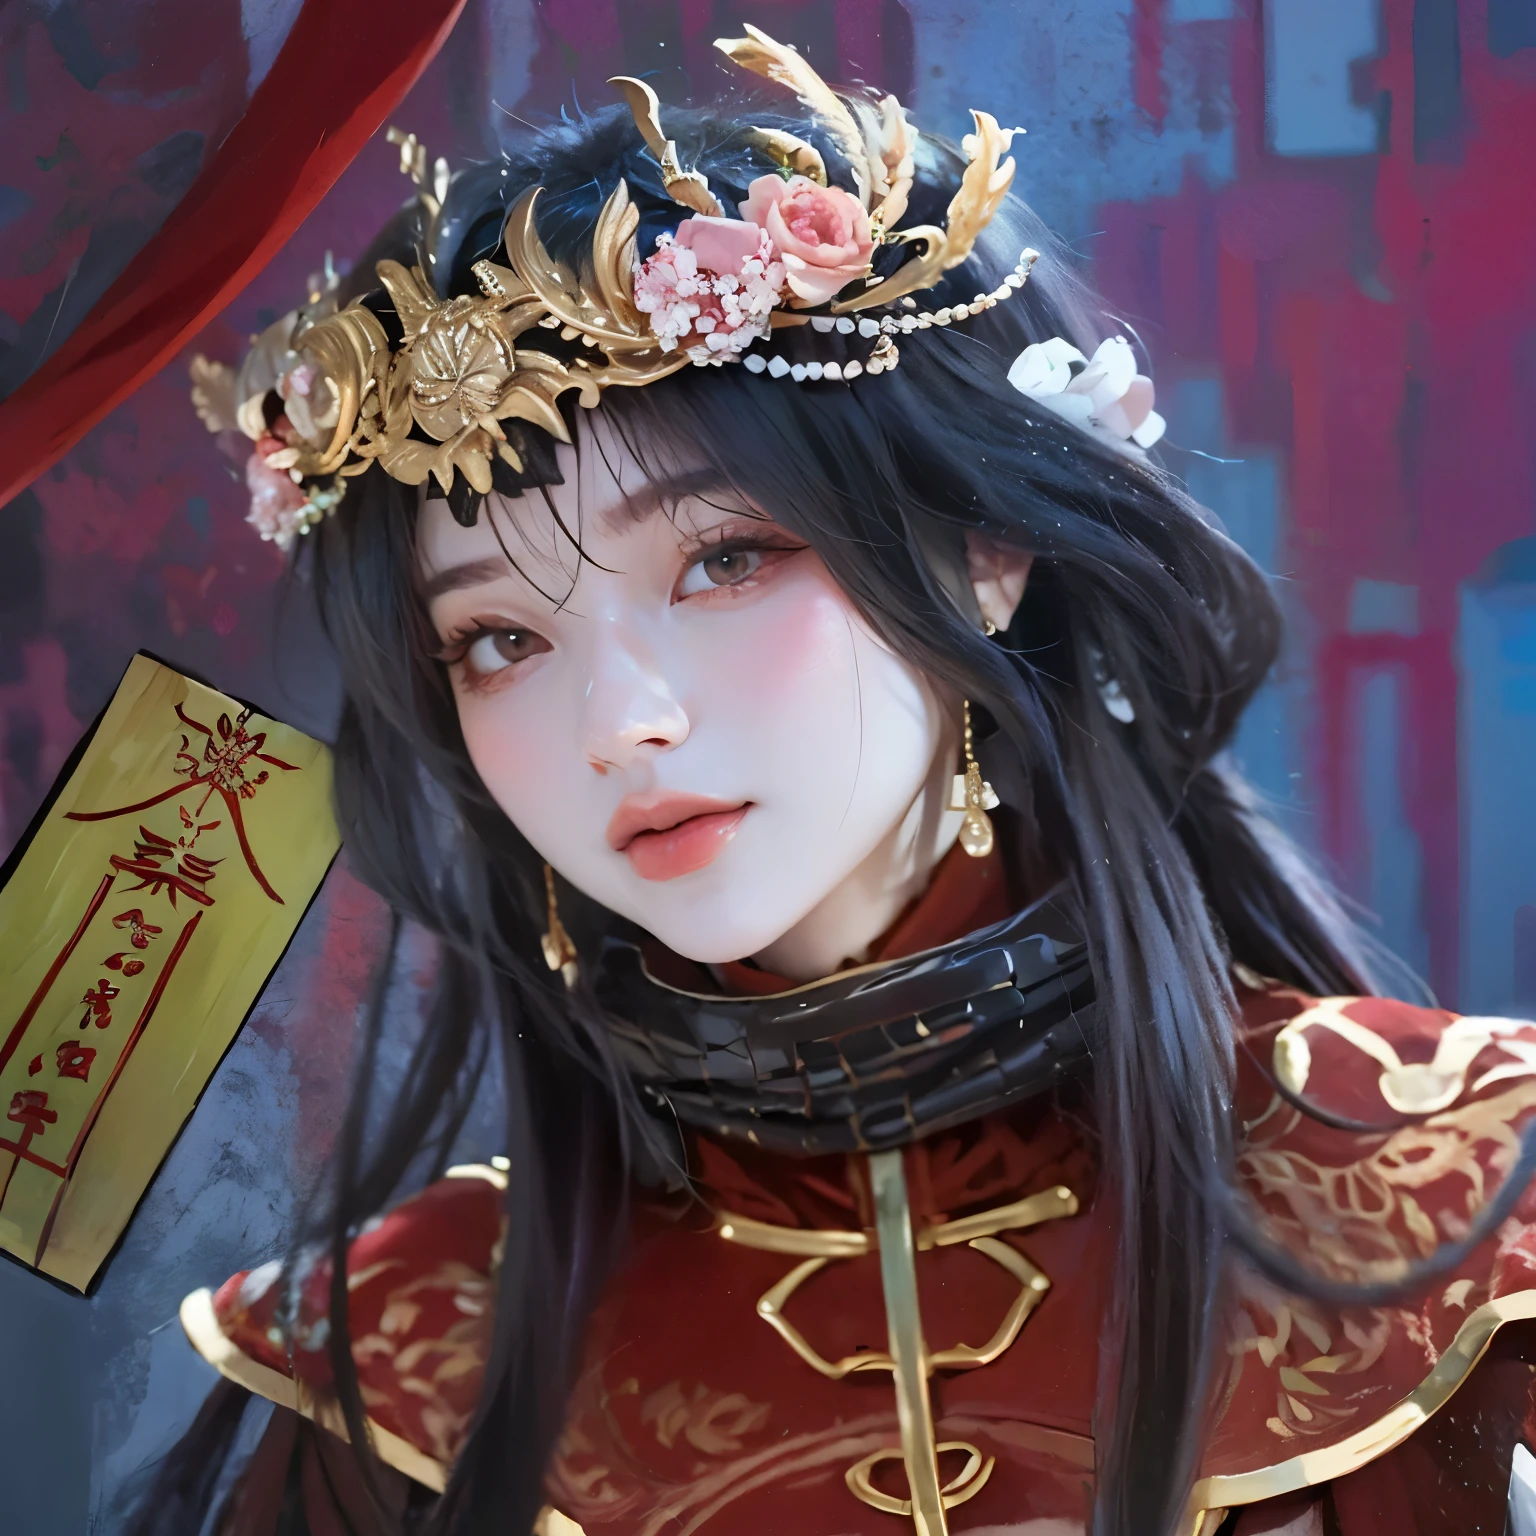 a close up of a woman wearing a crown and a red dress, palace ， a girl in hanfu, guweiz, inspired by Li Mei-shu, hanfu, artwork in the style of guweiz, a beautiful fantasy empress, ((a beautiful fantasy empress)), trending on cgstation, by Yang J, inspired by Wang Meng, inspired by Lan Ying